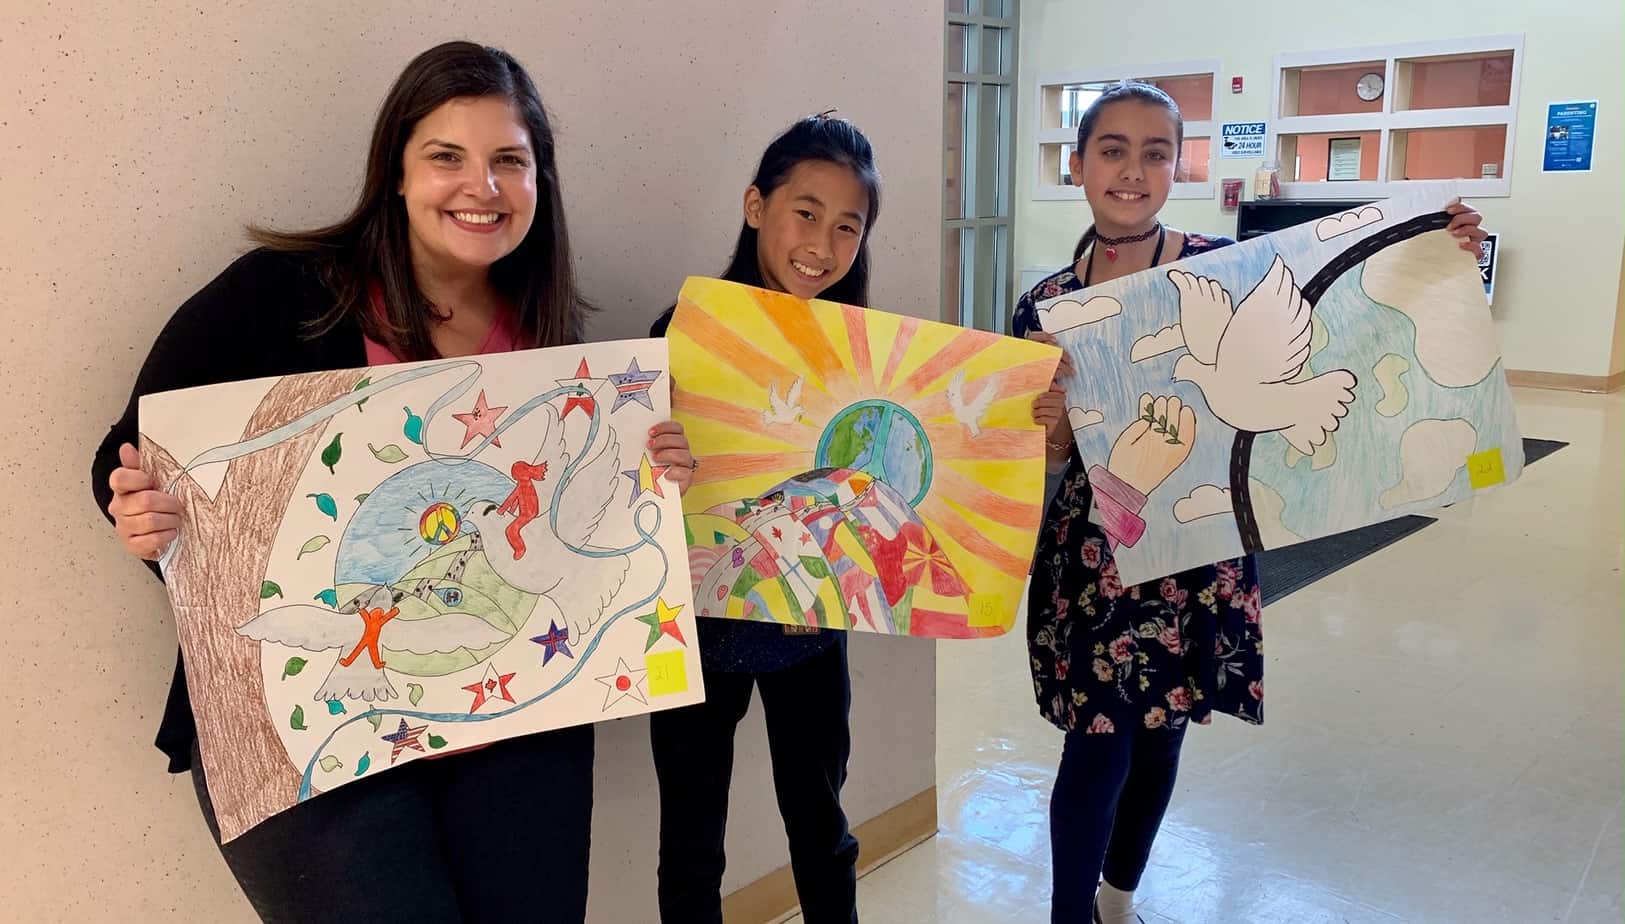 Medway Lions announce peace poster art contest